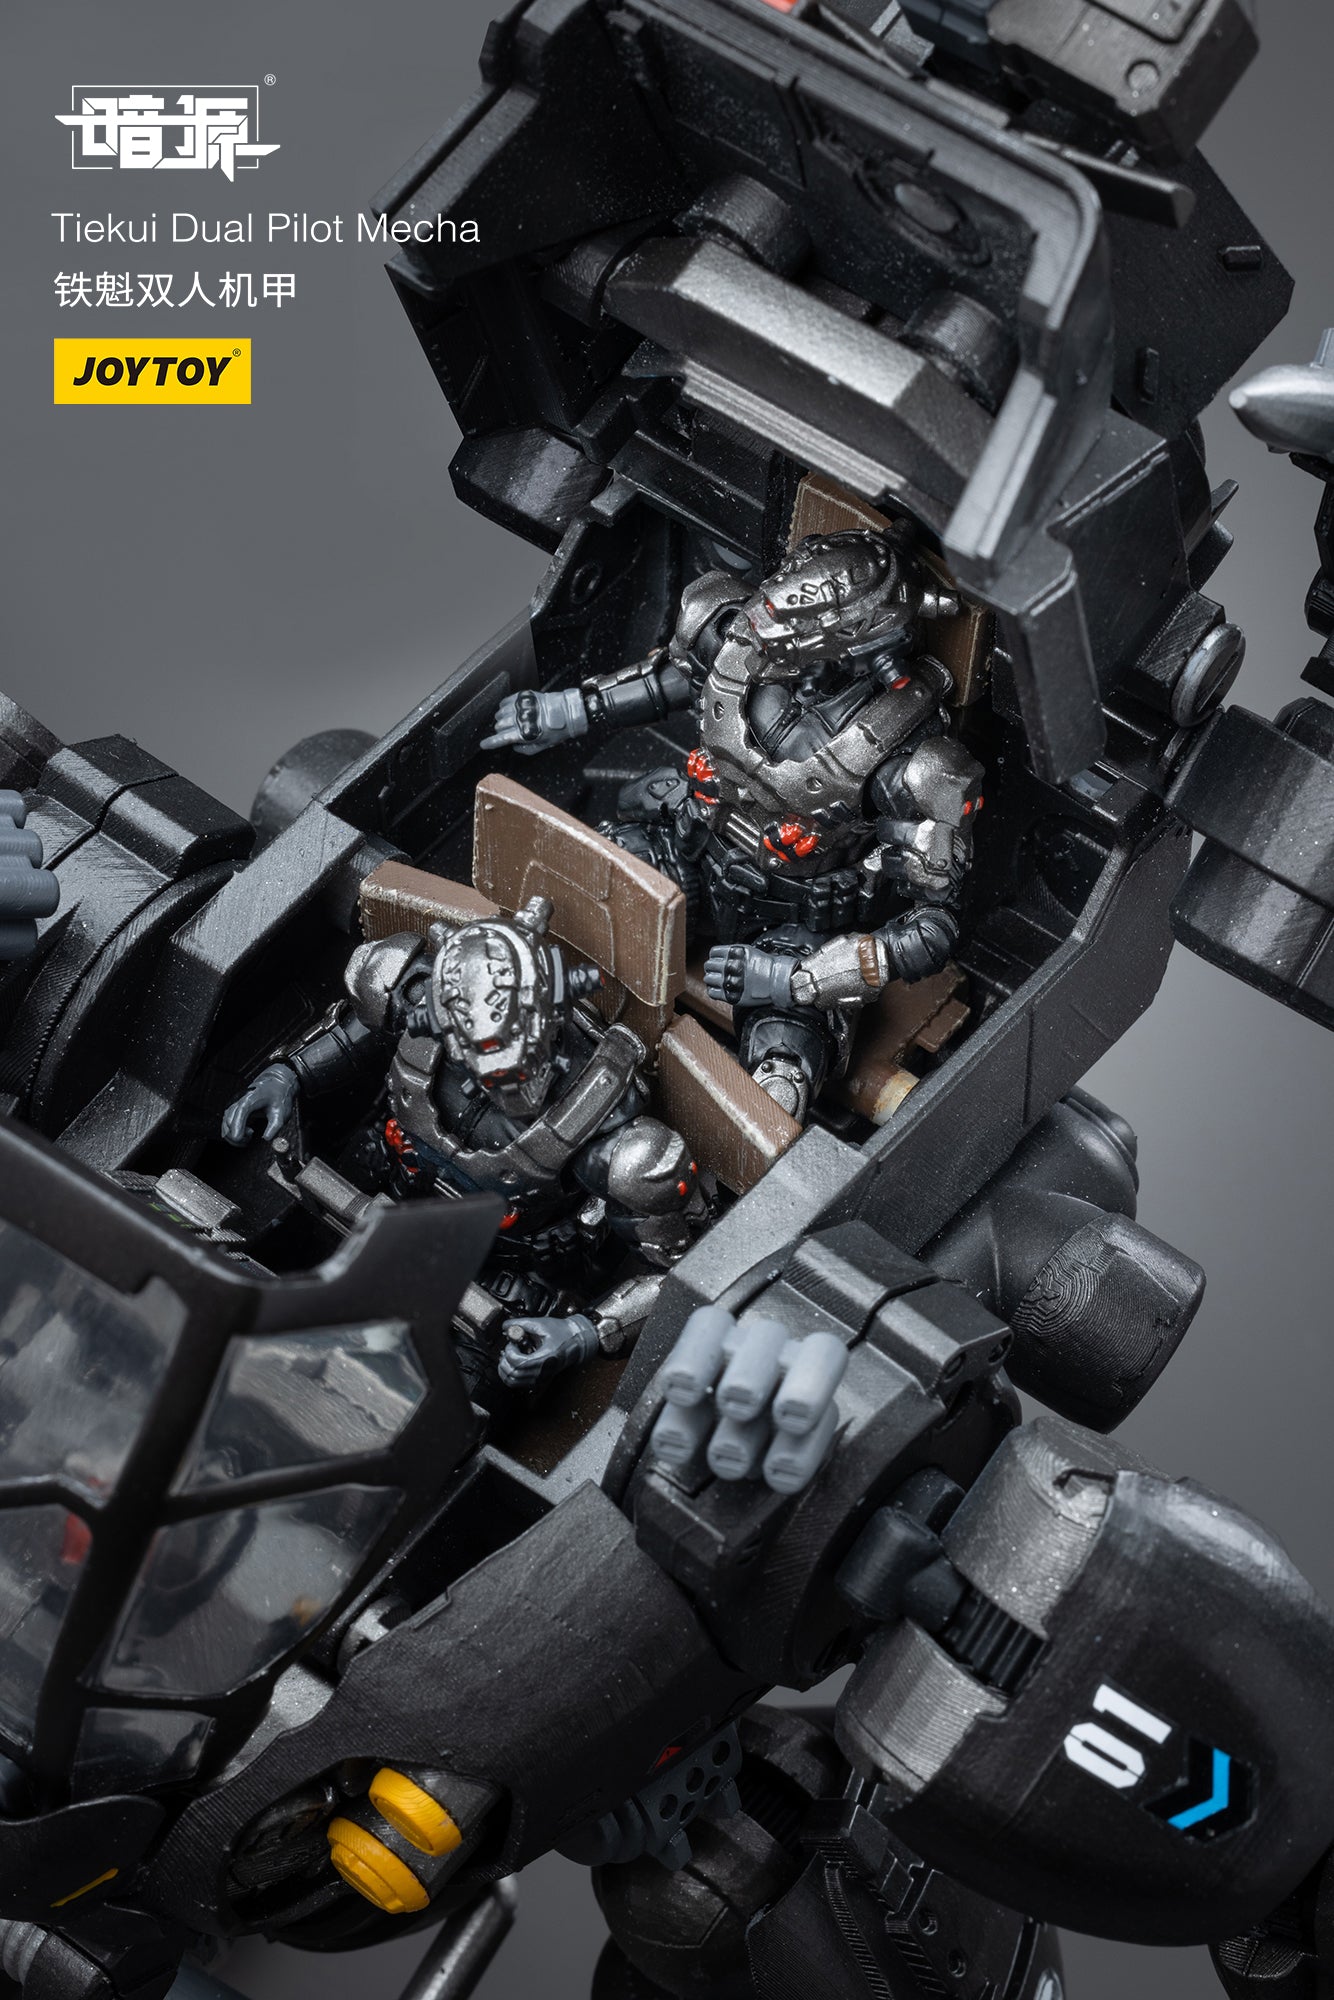 Joy Toy Dark Source Tiekui Dual Pilot Mecha is incredibly detailed in 1/18 scale. JoyToy, each figure is highly articulated and includes accessories. 